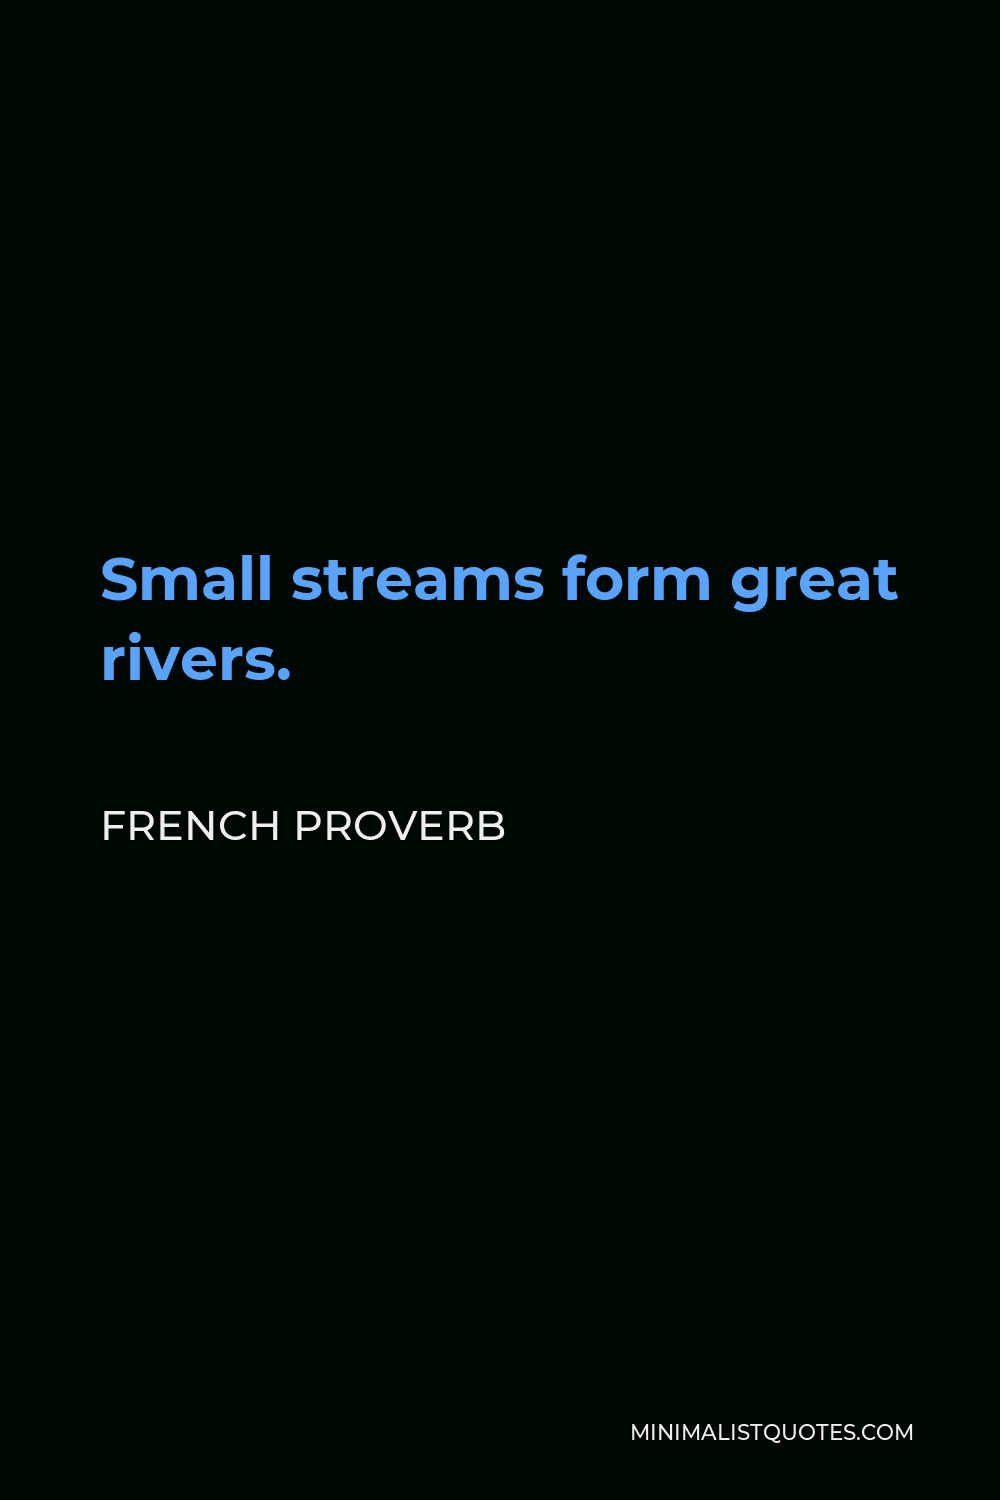 French Proverb Quote - Small streams form great rivers.